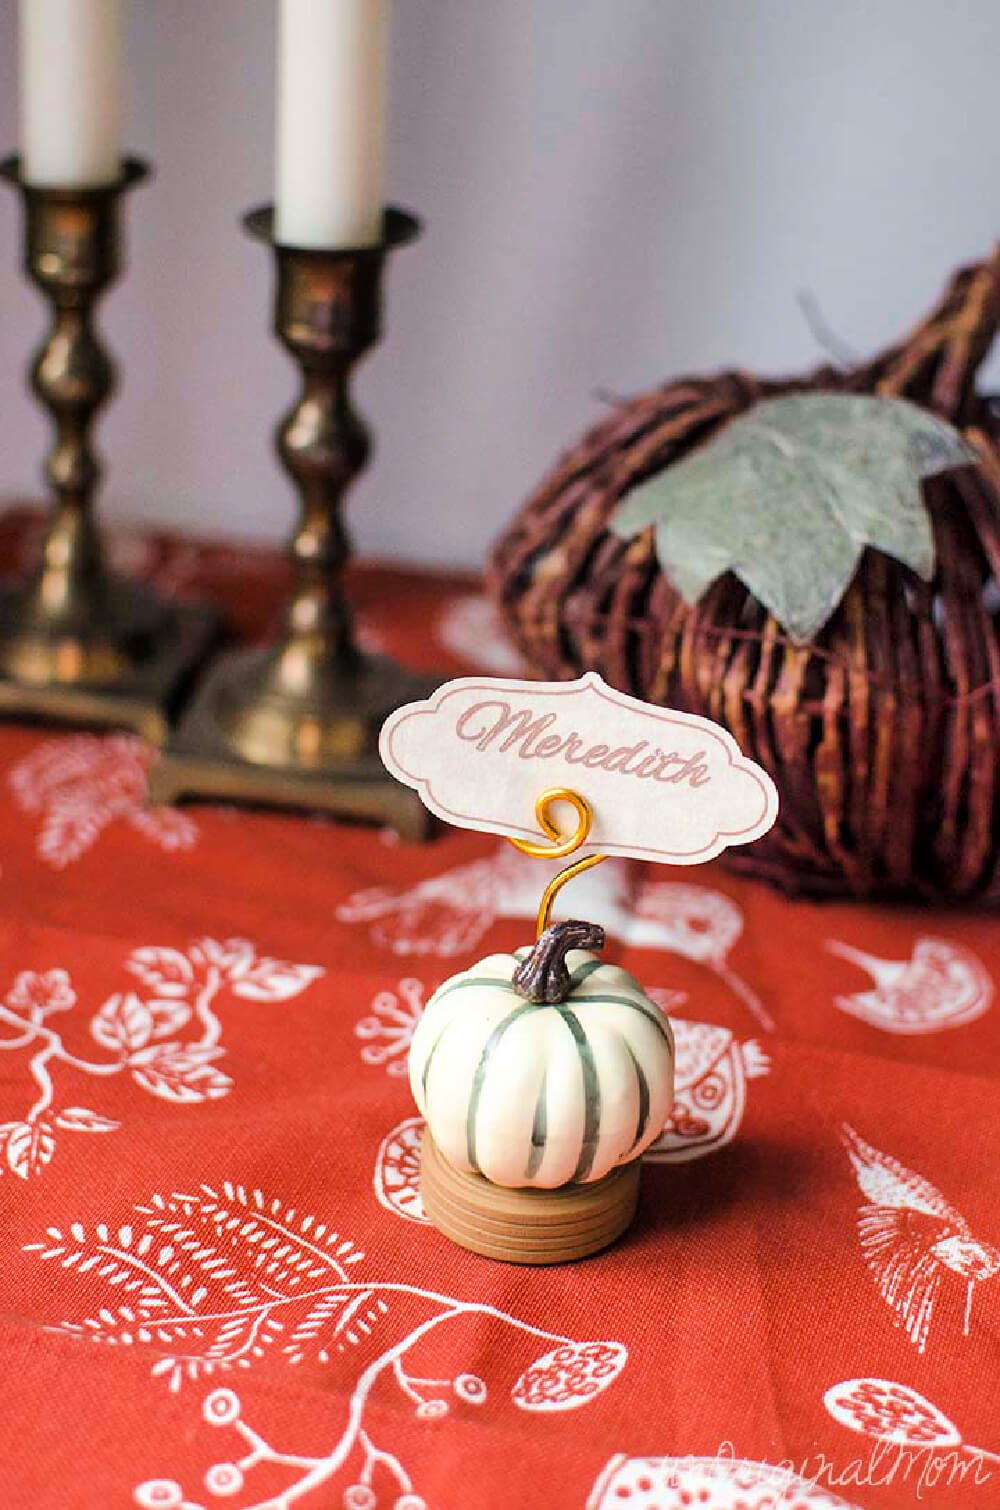 In 10 Thanksgiving Place Card Ideas, Faux pumpkin has a name attached